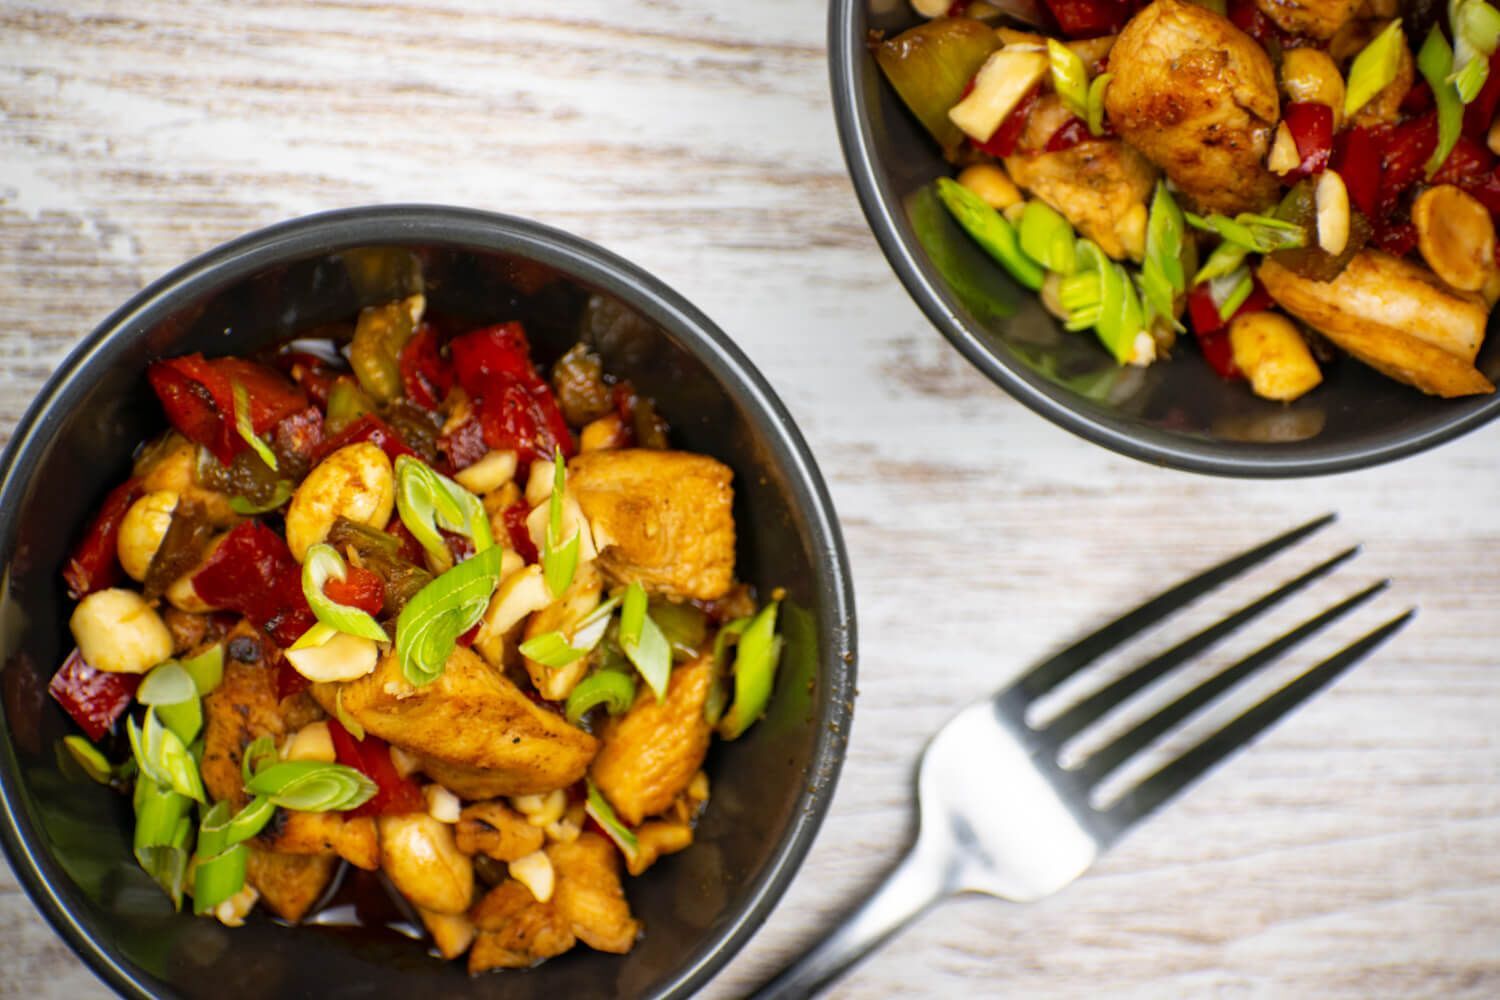 Low carb kung pao chicken with peppers, green onions, and cashews.